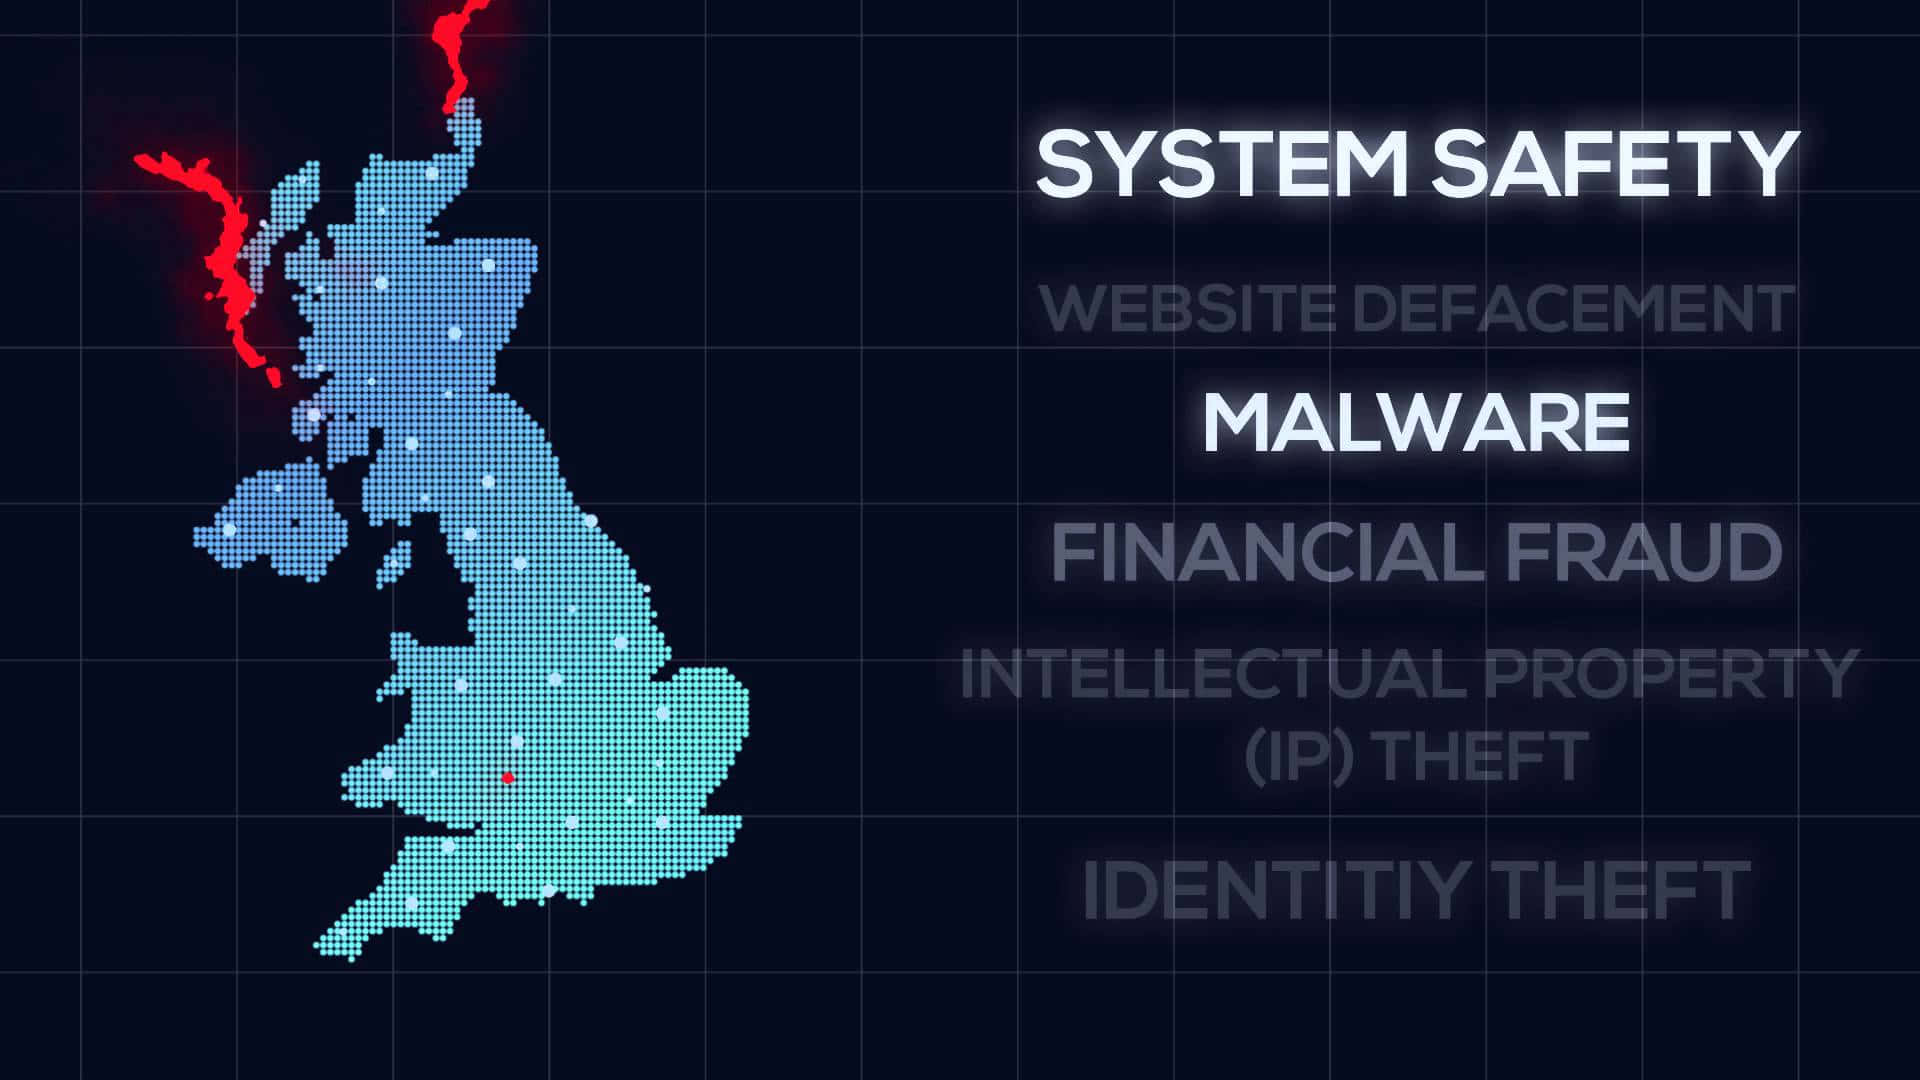 A Map Of The Uk With The Words System Safety And Financial Fraud